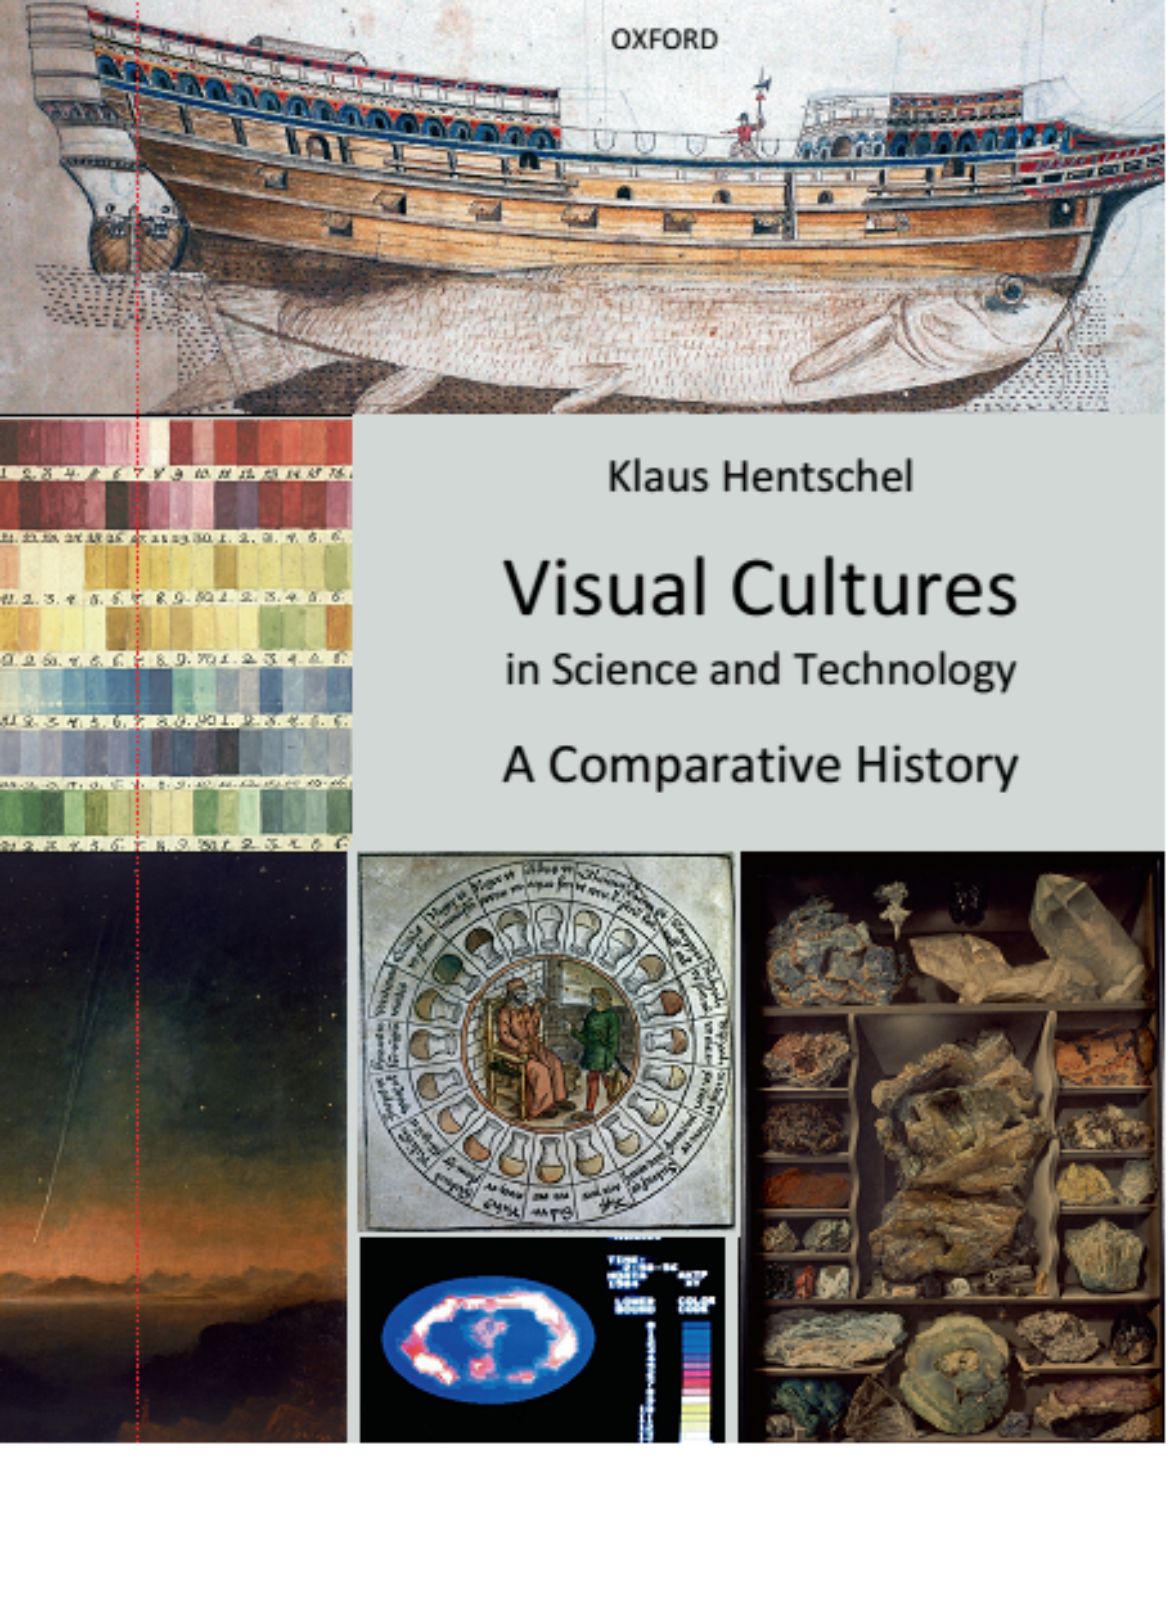 Visual Cultures in Science and Technology.